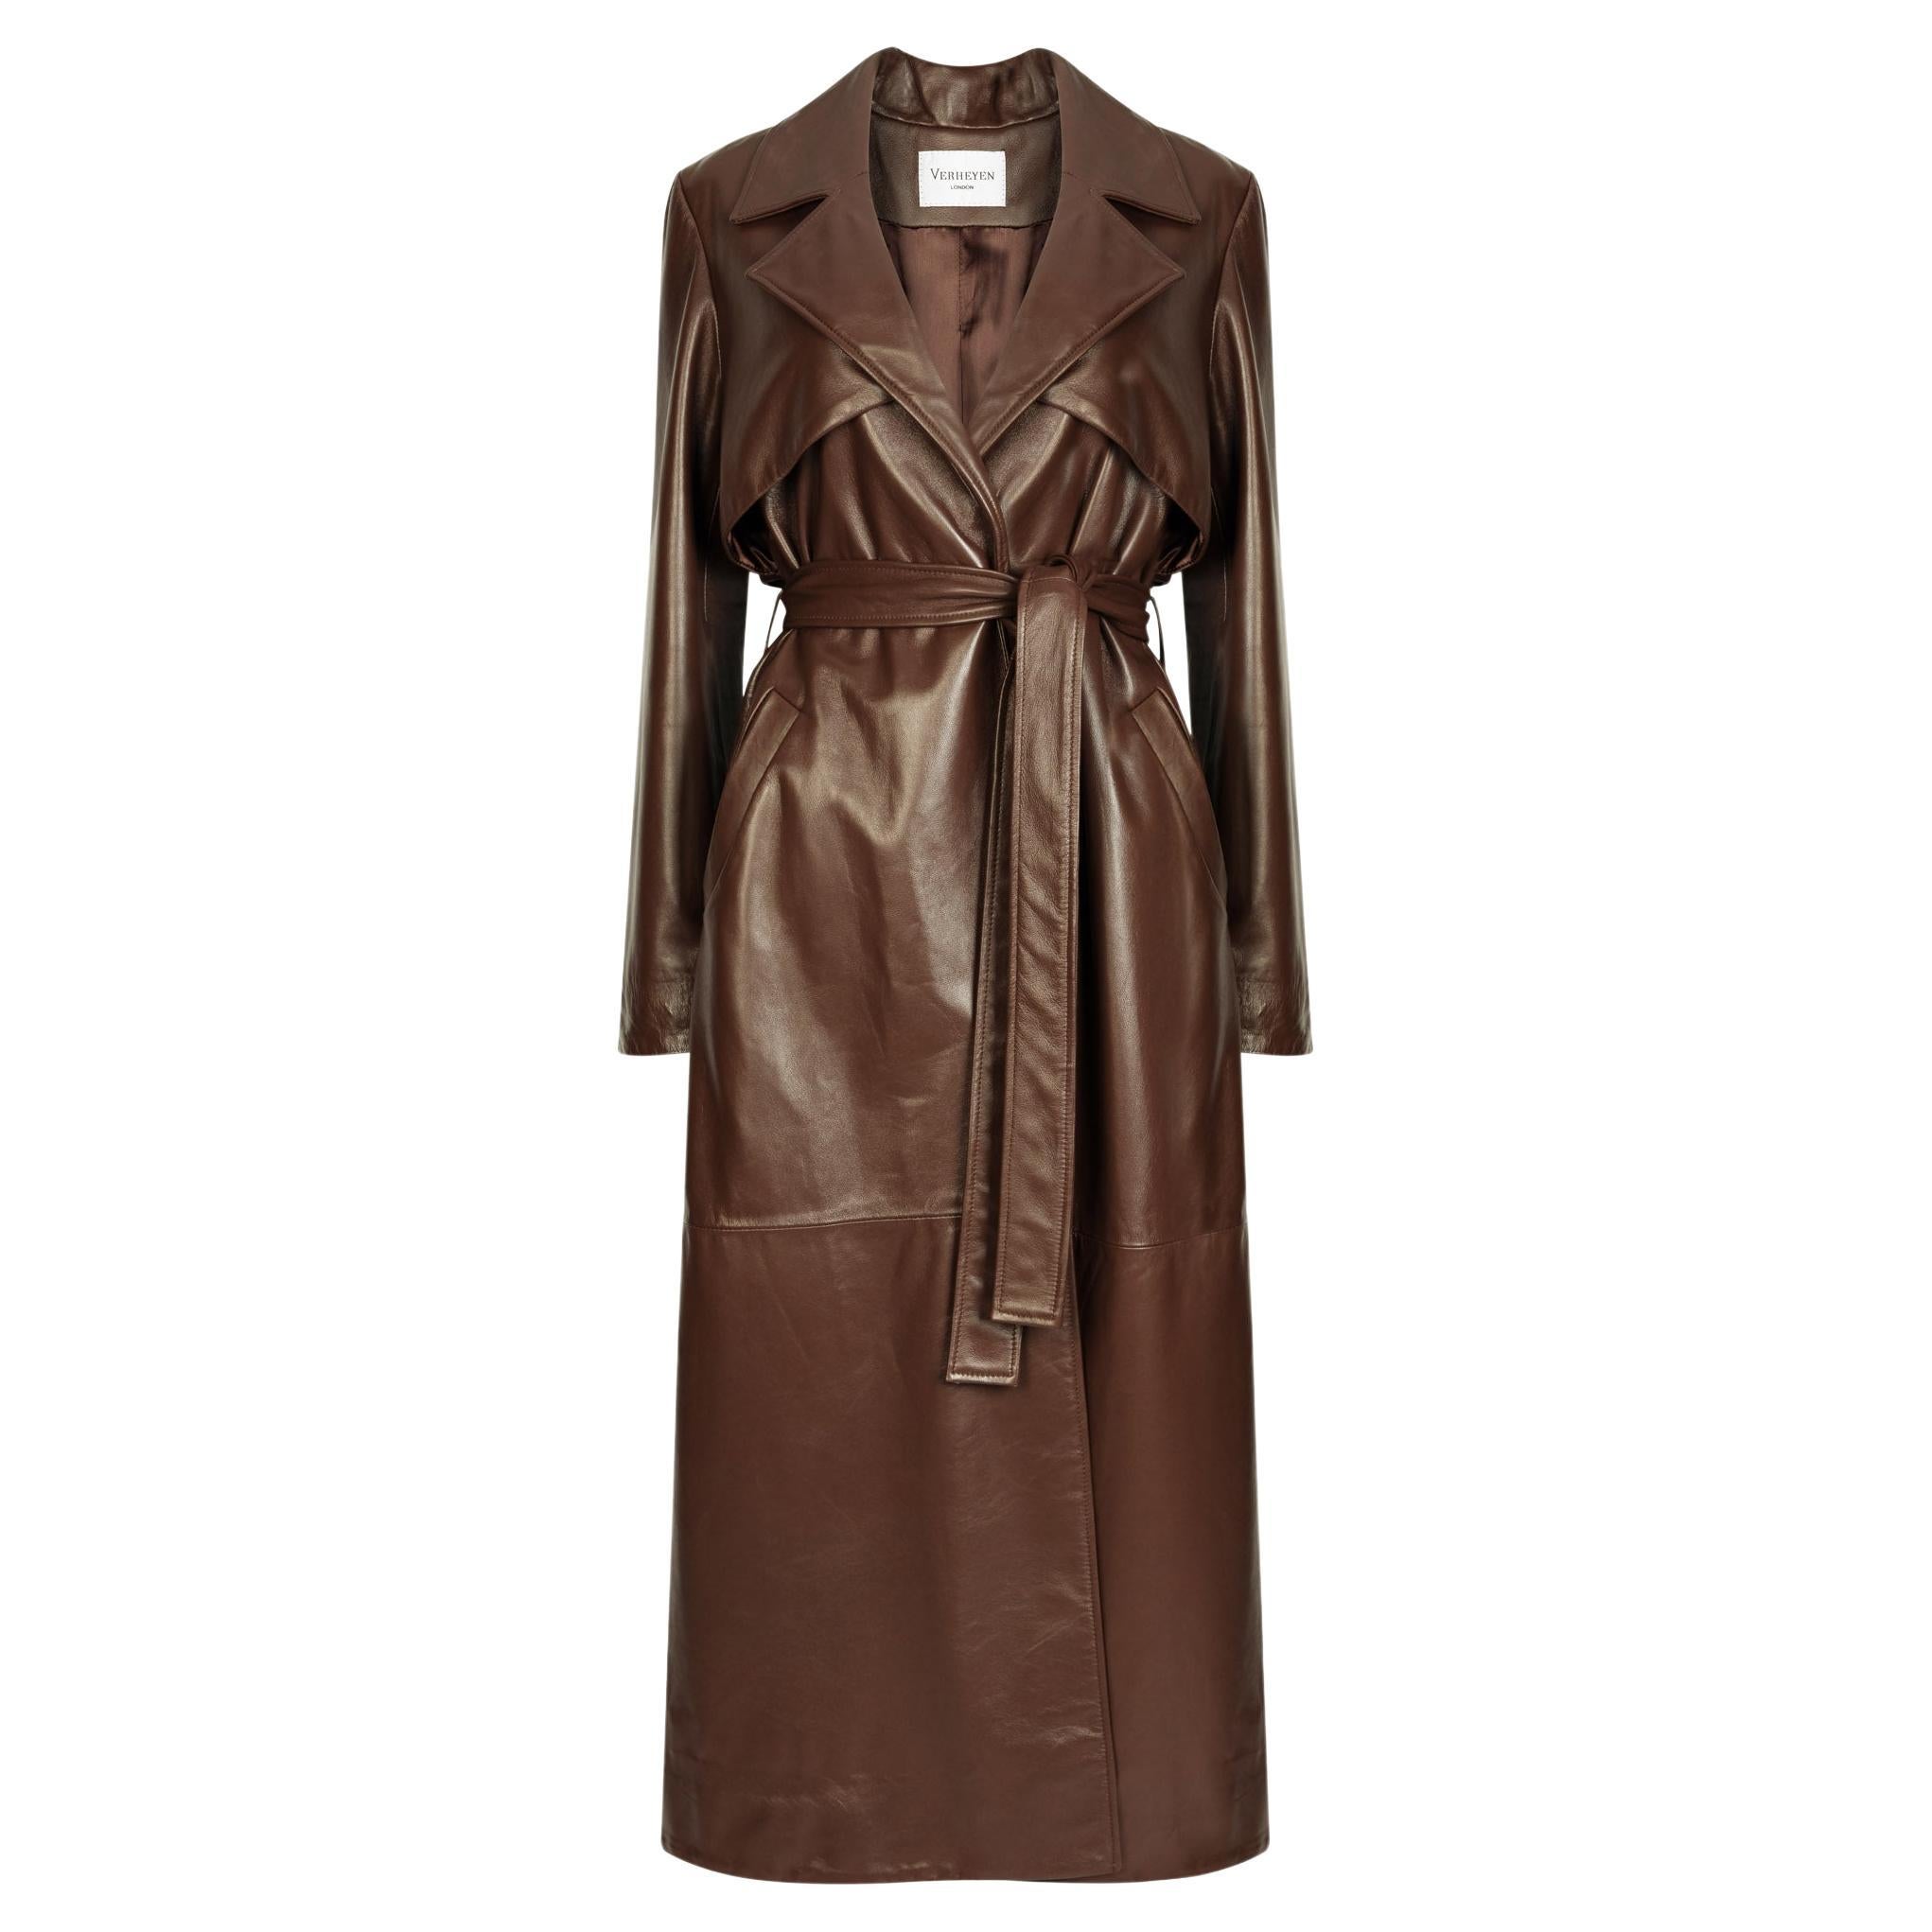 Verheyen London Leather Trench Coat in Chocolate Brown - Size uk 16 For Sale